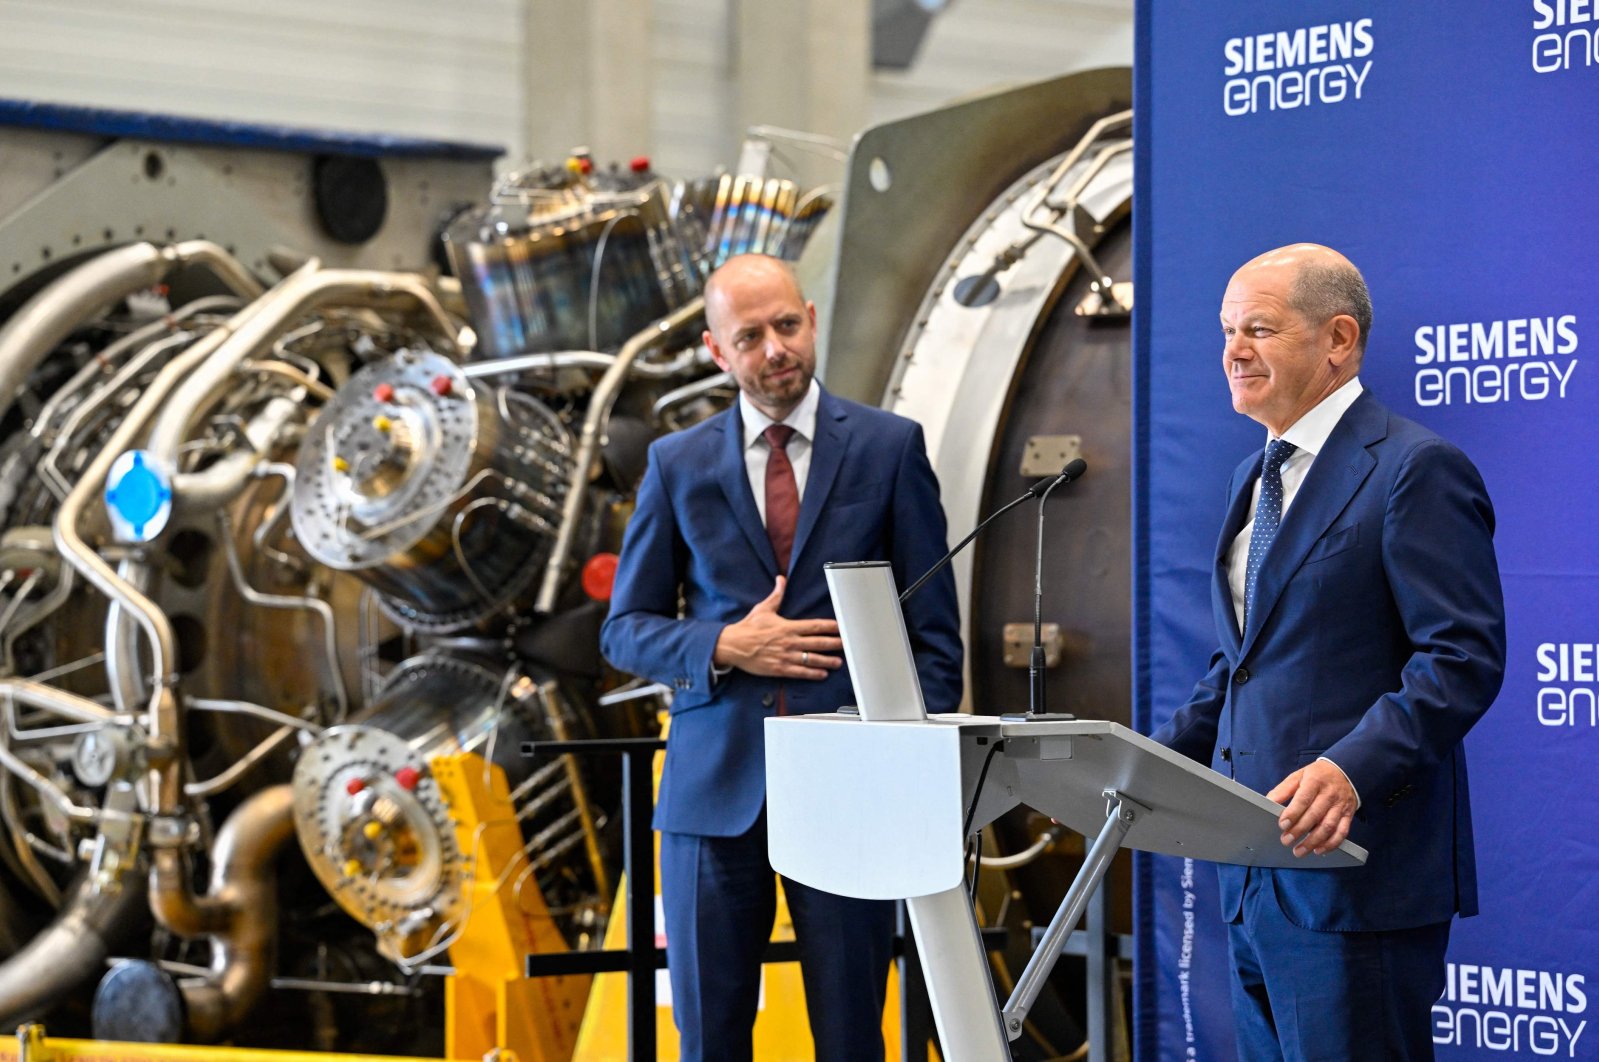 German Chancellor Olaf Scholz (R) stands next to Christian Bruch, President and CEO of Siemens Energy, in front of a turbine of the Nord Stream 1 pipeline as Scholz gives a statement during a visit at the plant of Siemens Energy in Muelheim an der Ruhr, western Germany, Aug. 3, 2022. (AFP Photo)